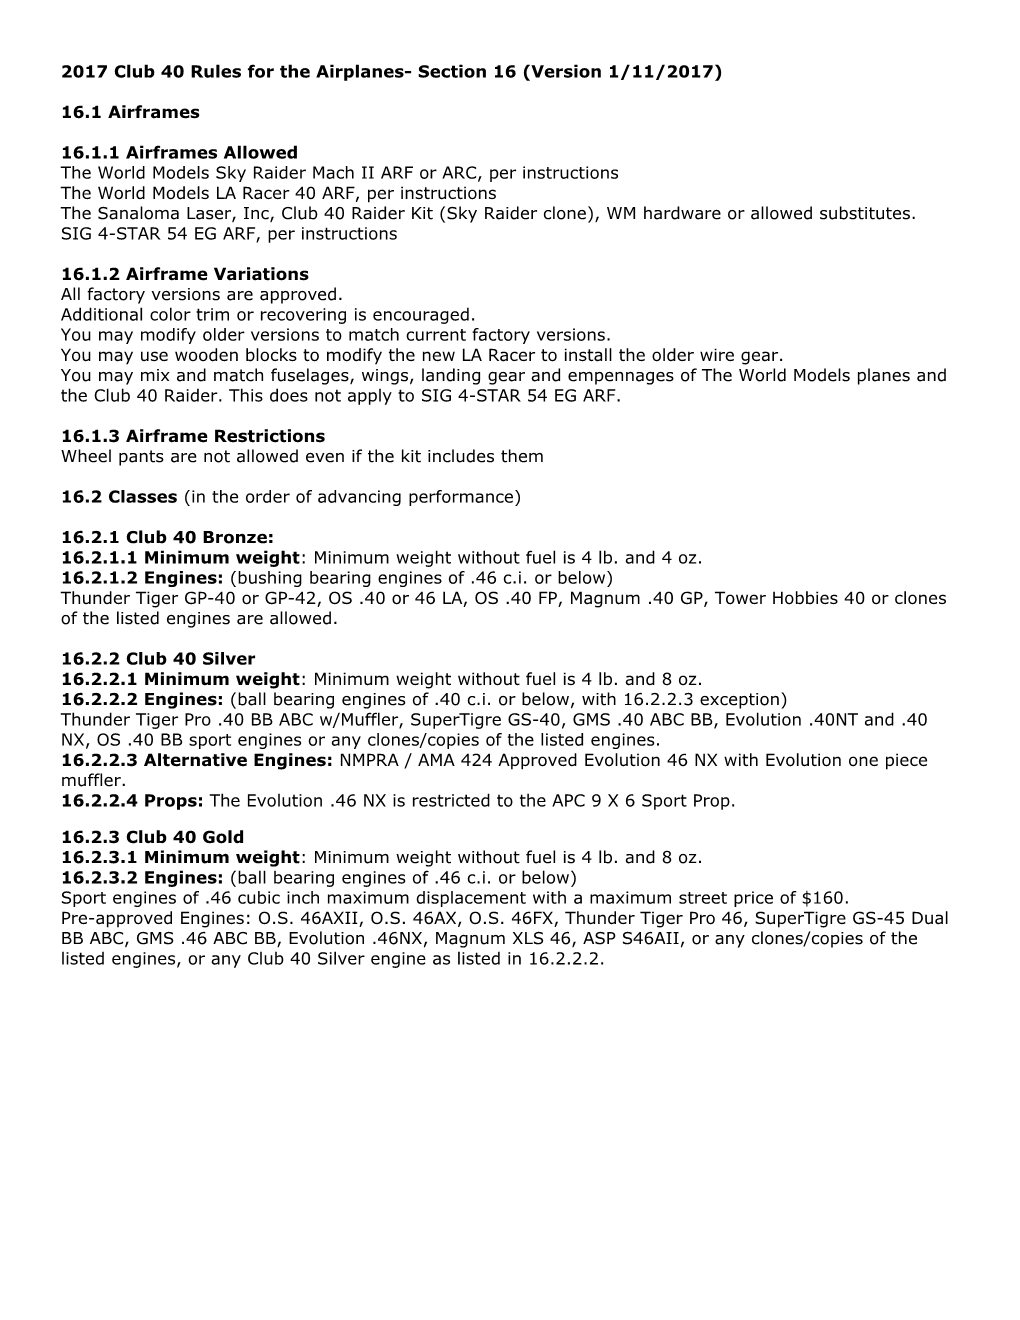 Club 40 Rules for the Airplanes- (Version 12-29-2010)